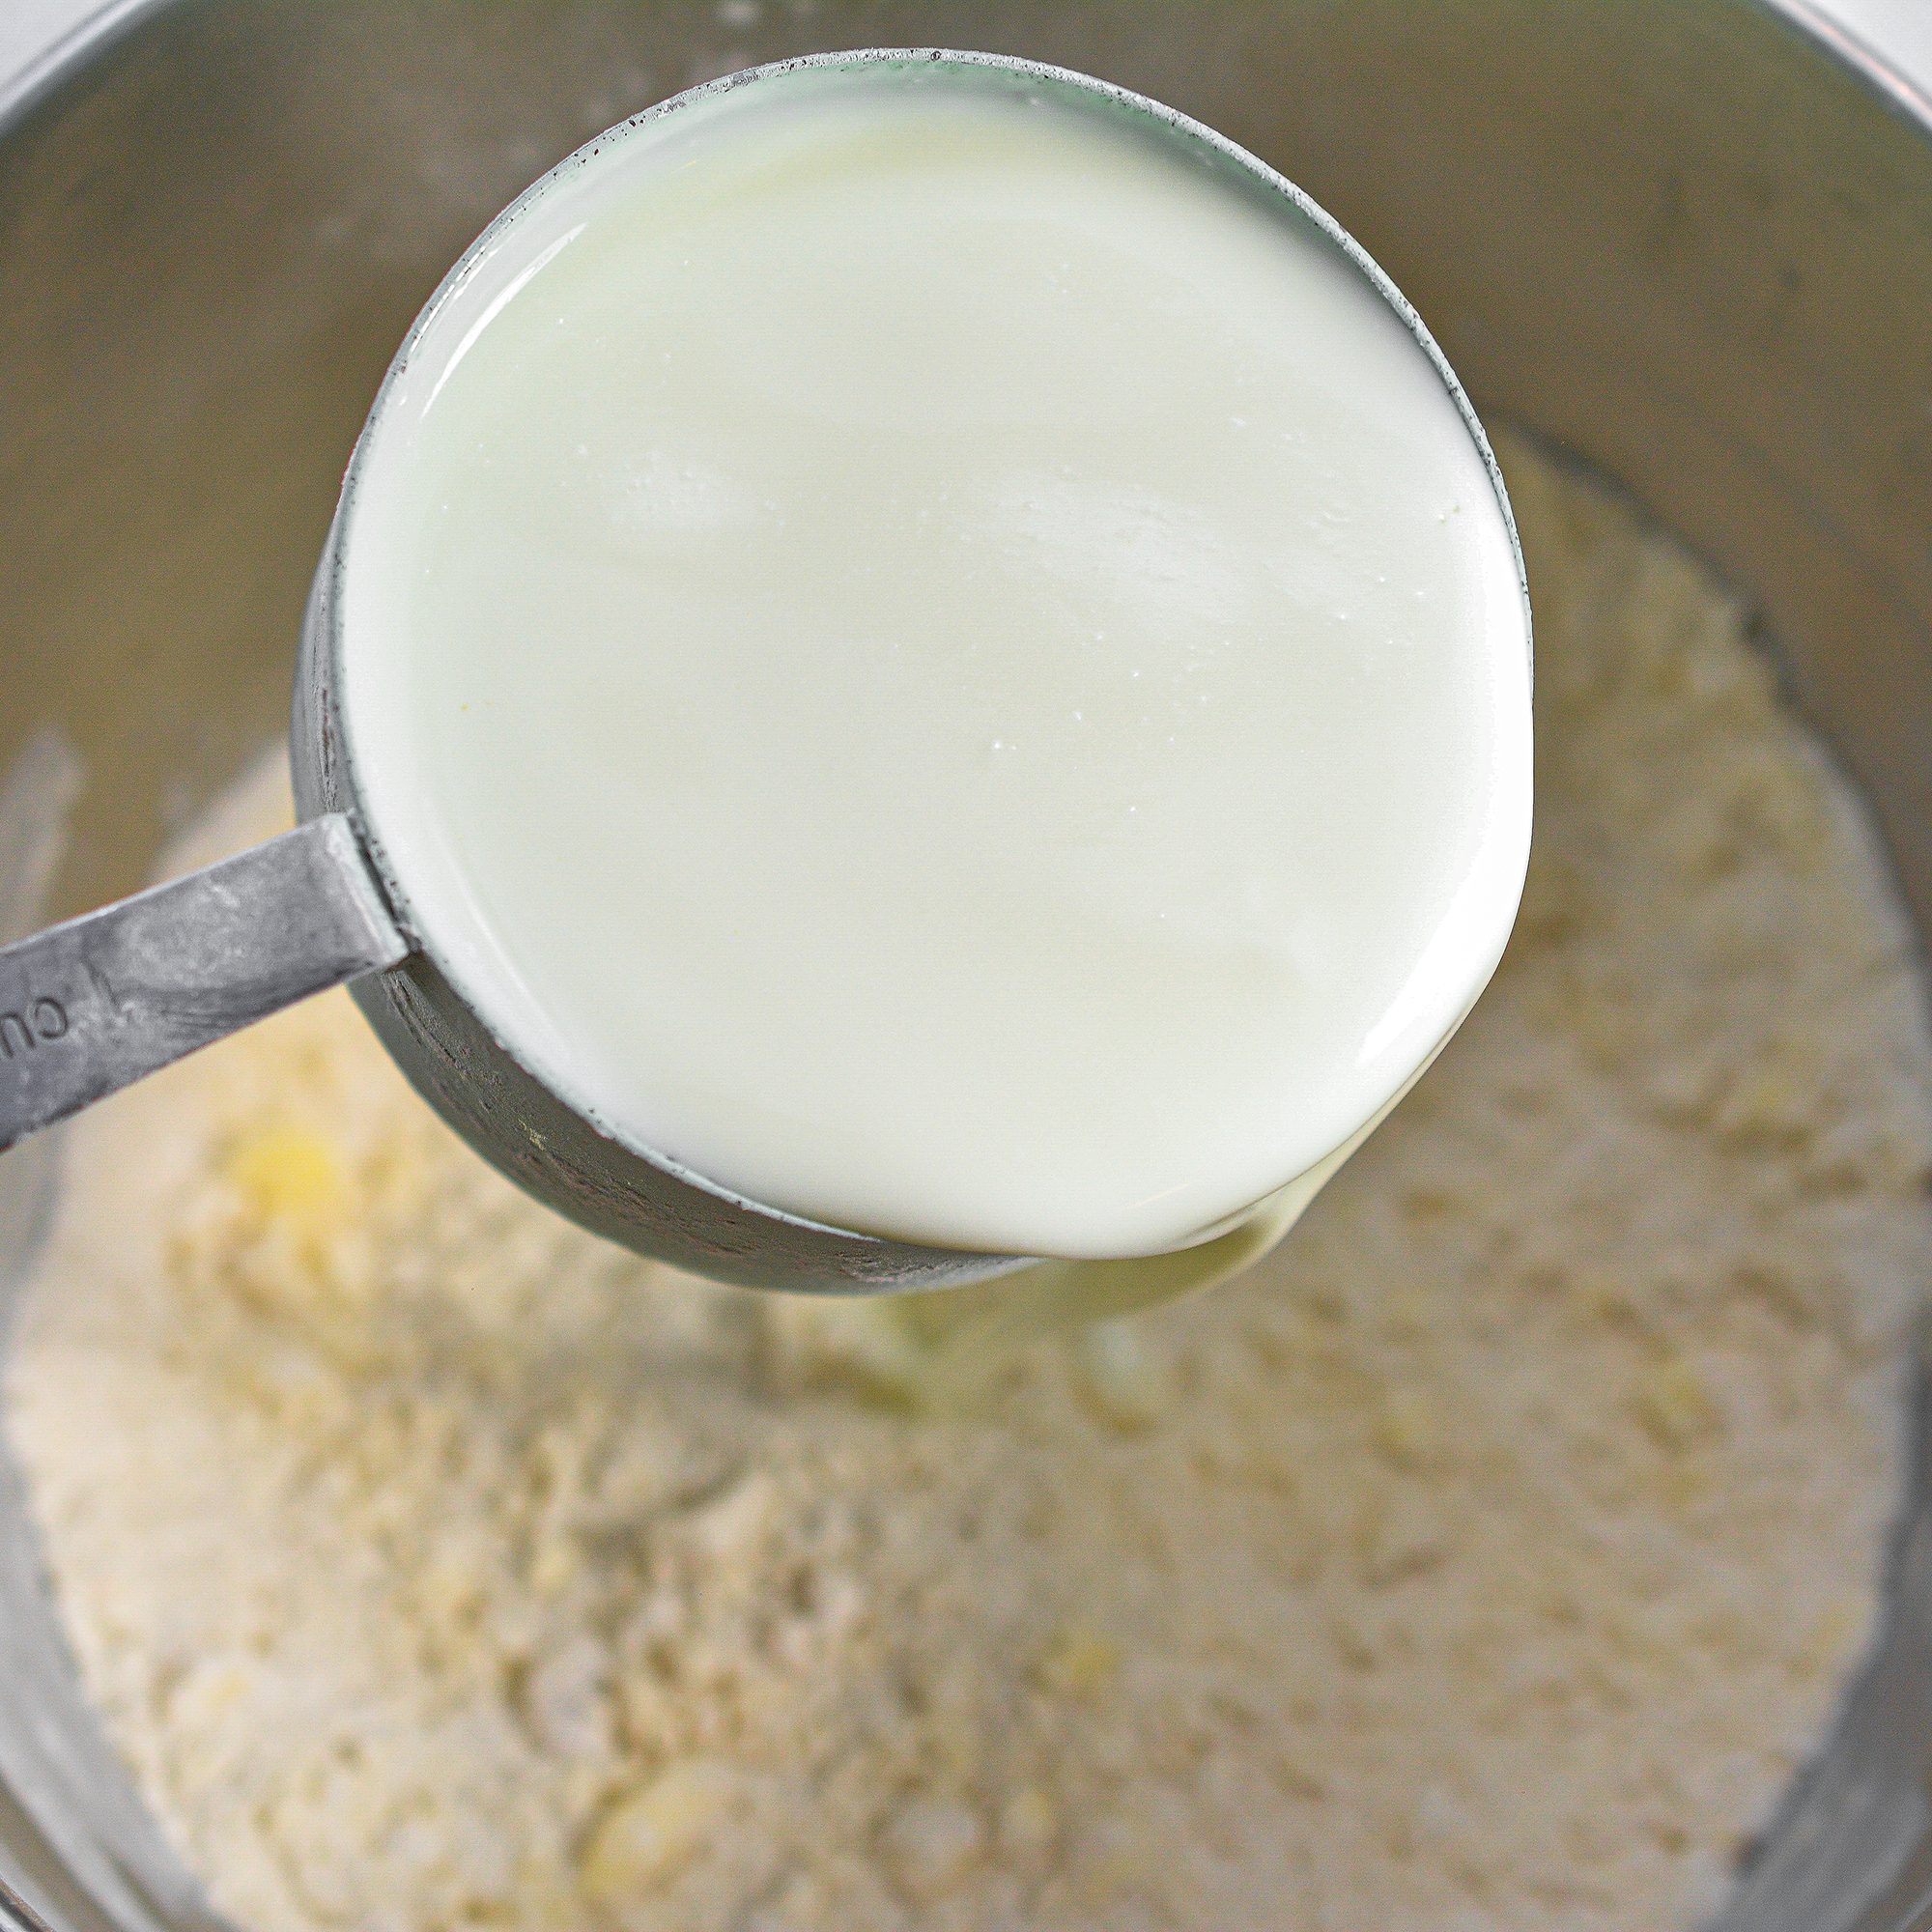 Pour in the buttermilk and stir until a dough has formed.